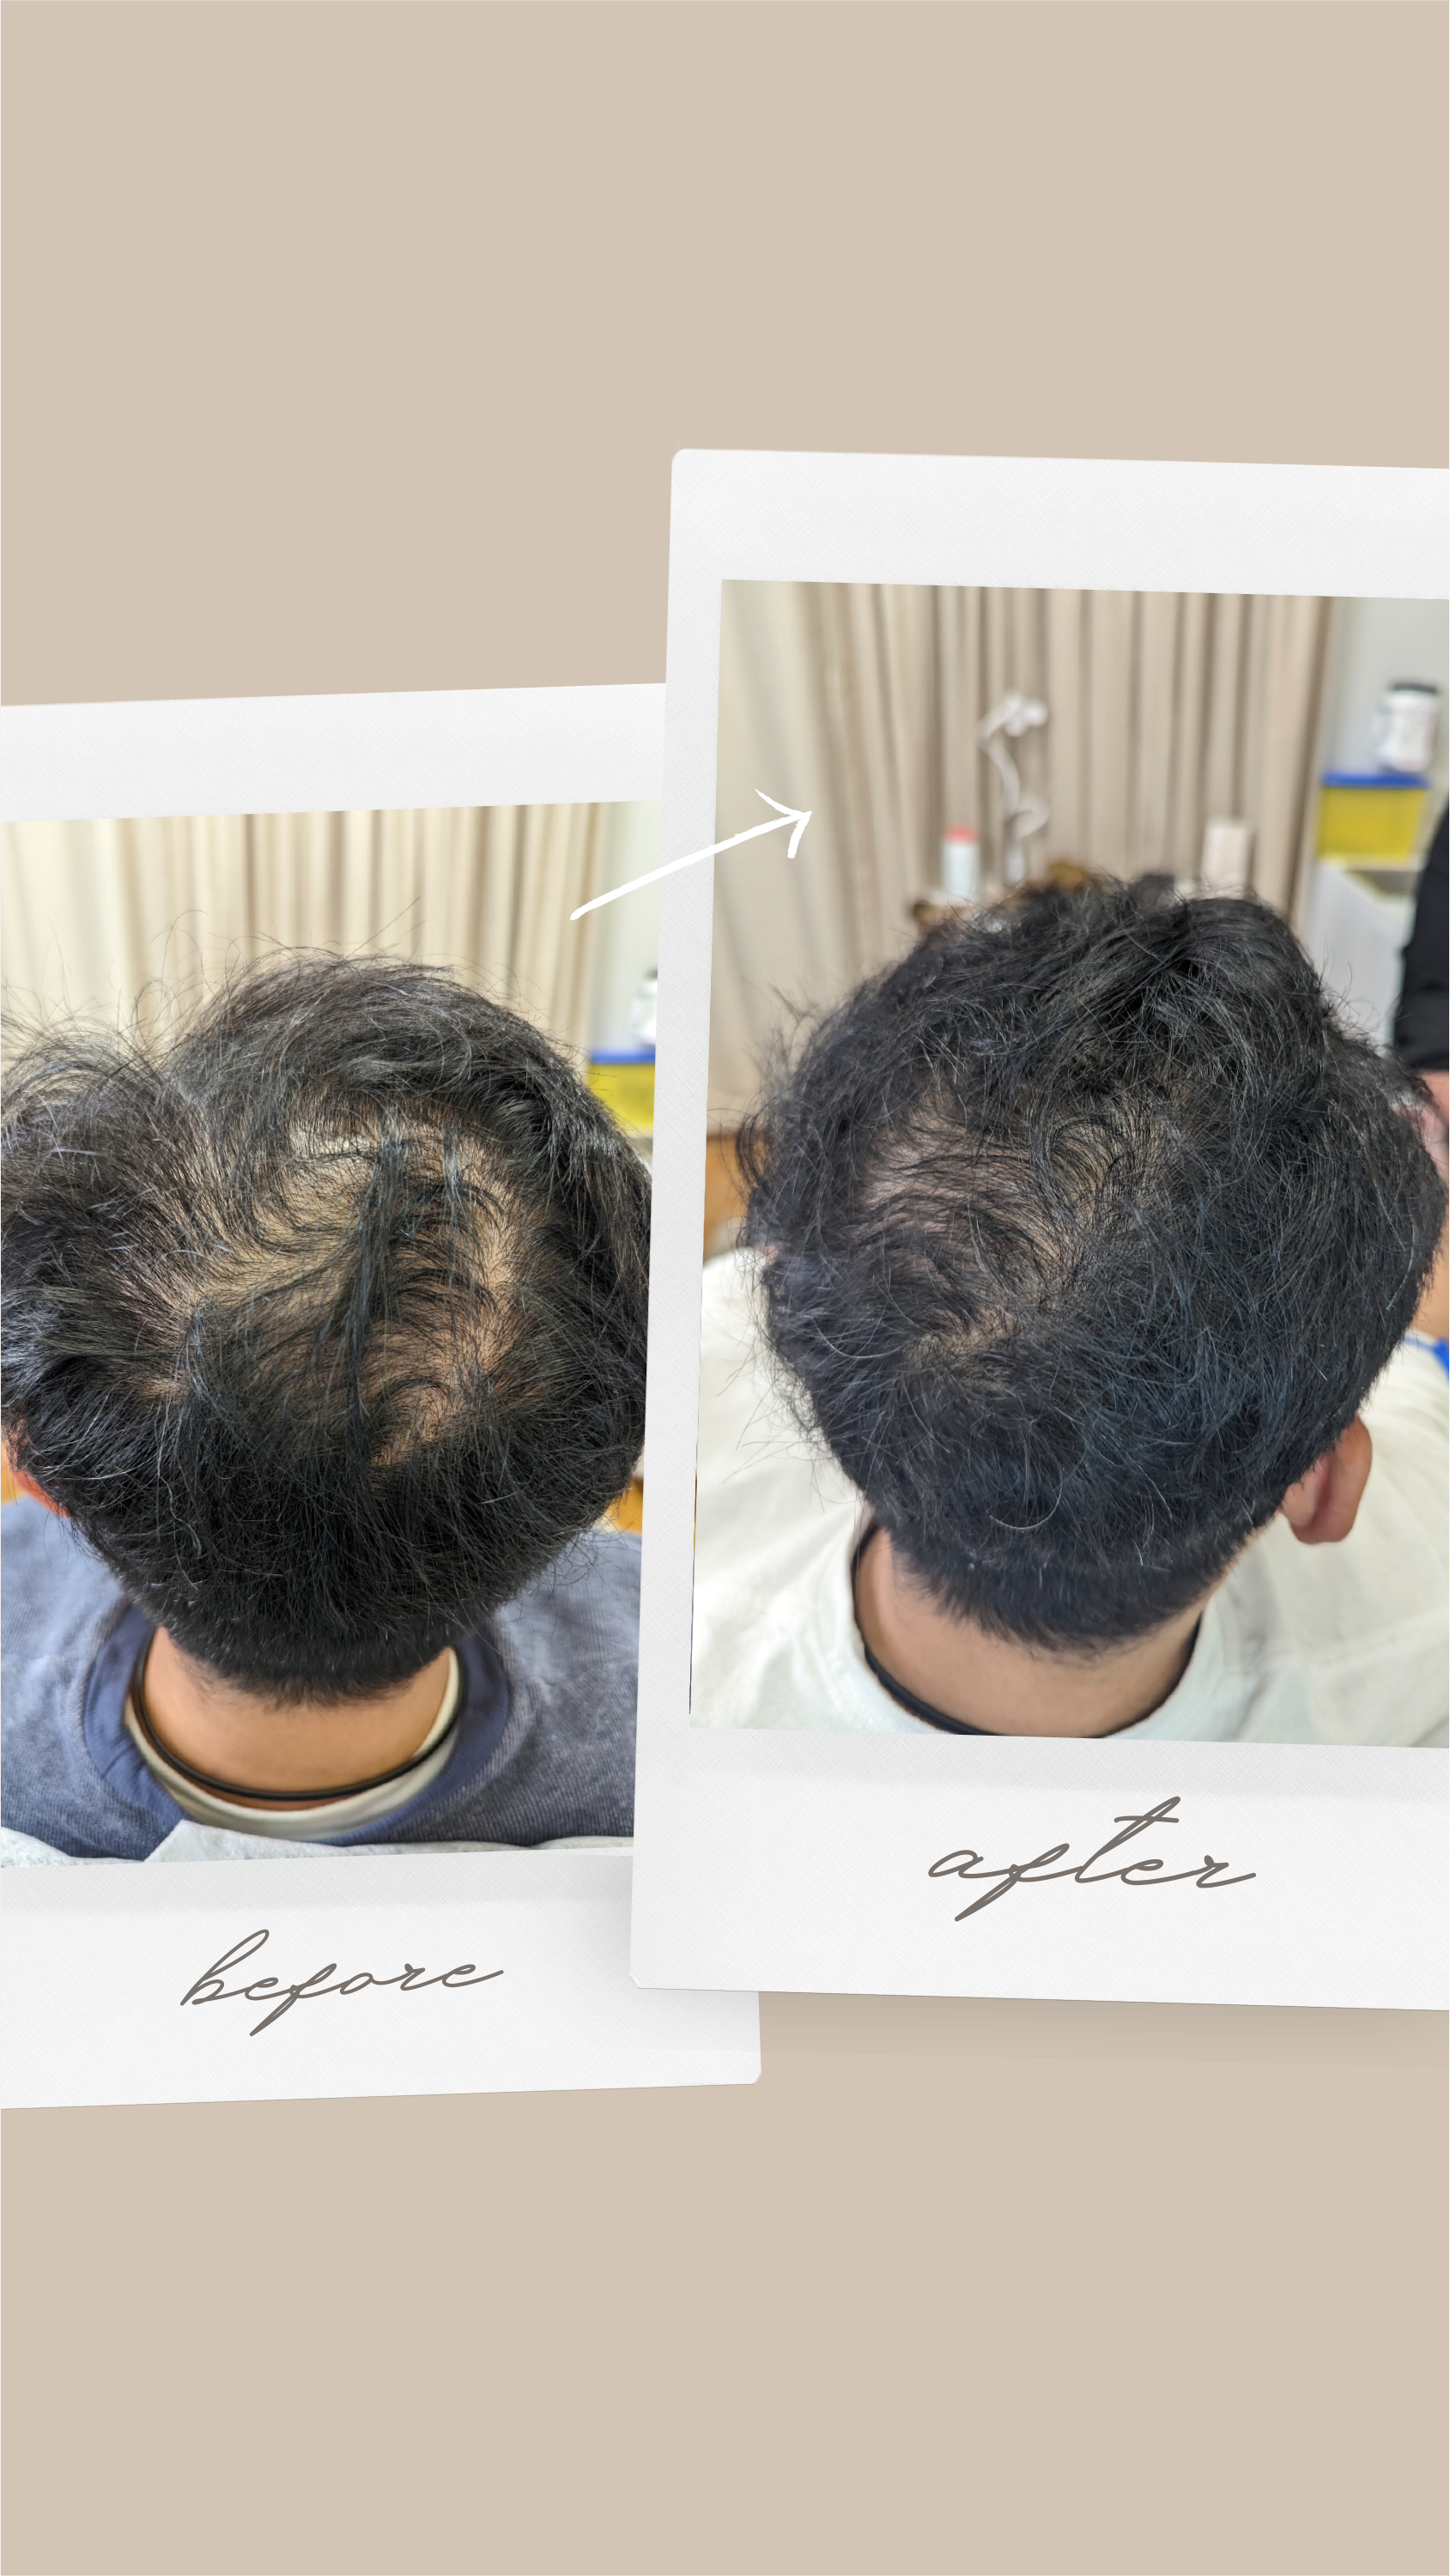 A before and after photo of a man 's hair growth.